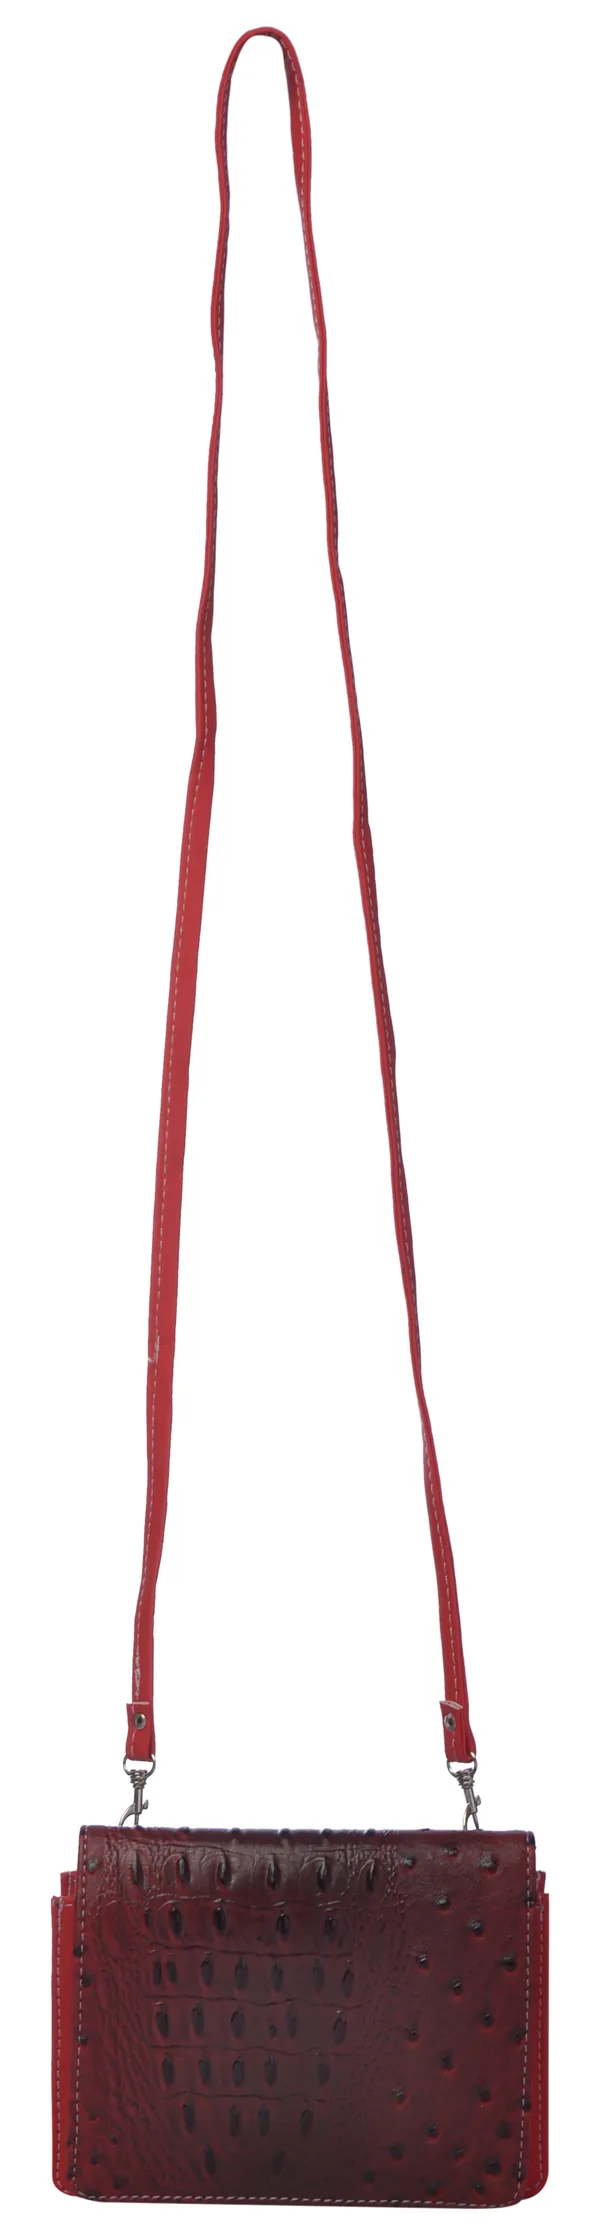 Exotique_Women's_Red_Sling_Bag_(CW0017RD)__Exotique